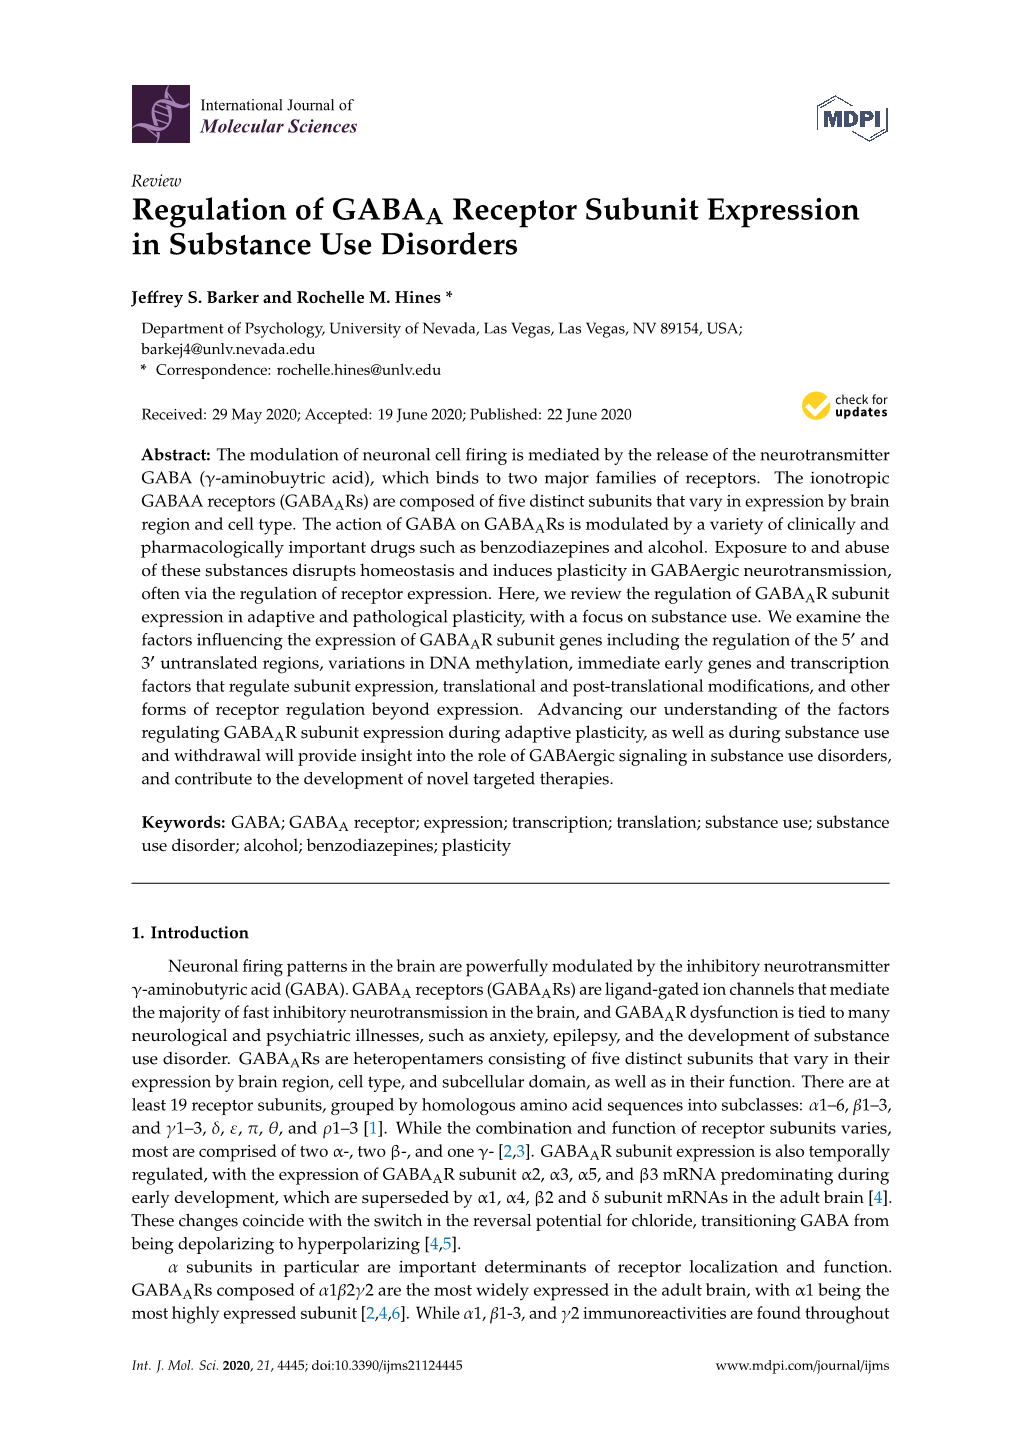 Regulation of GABAA Receptor Subunit Expression in Substance Use Disorders